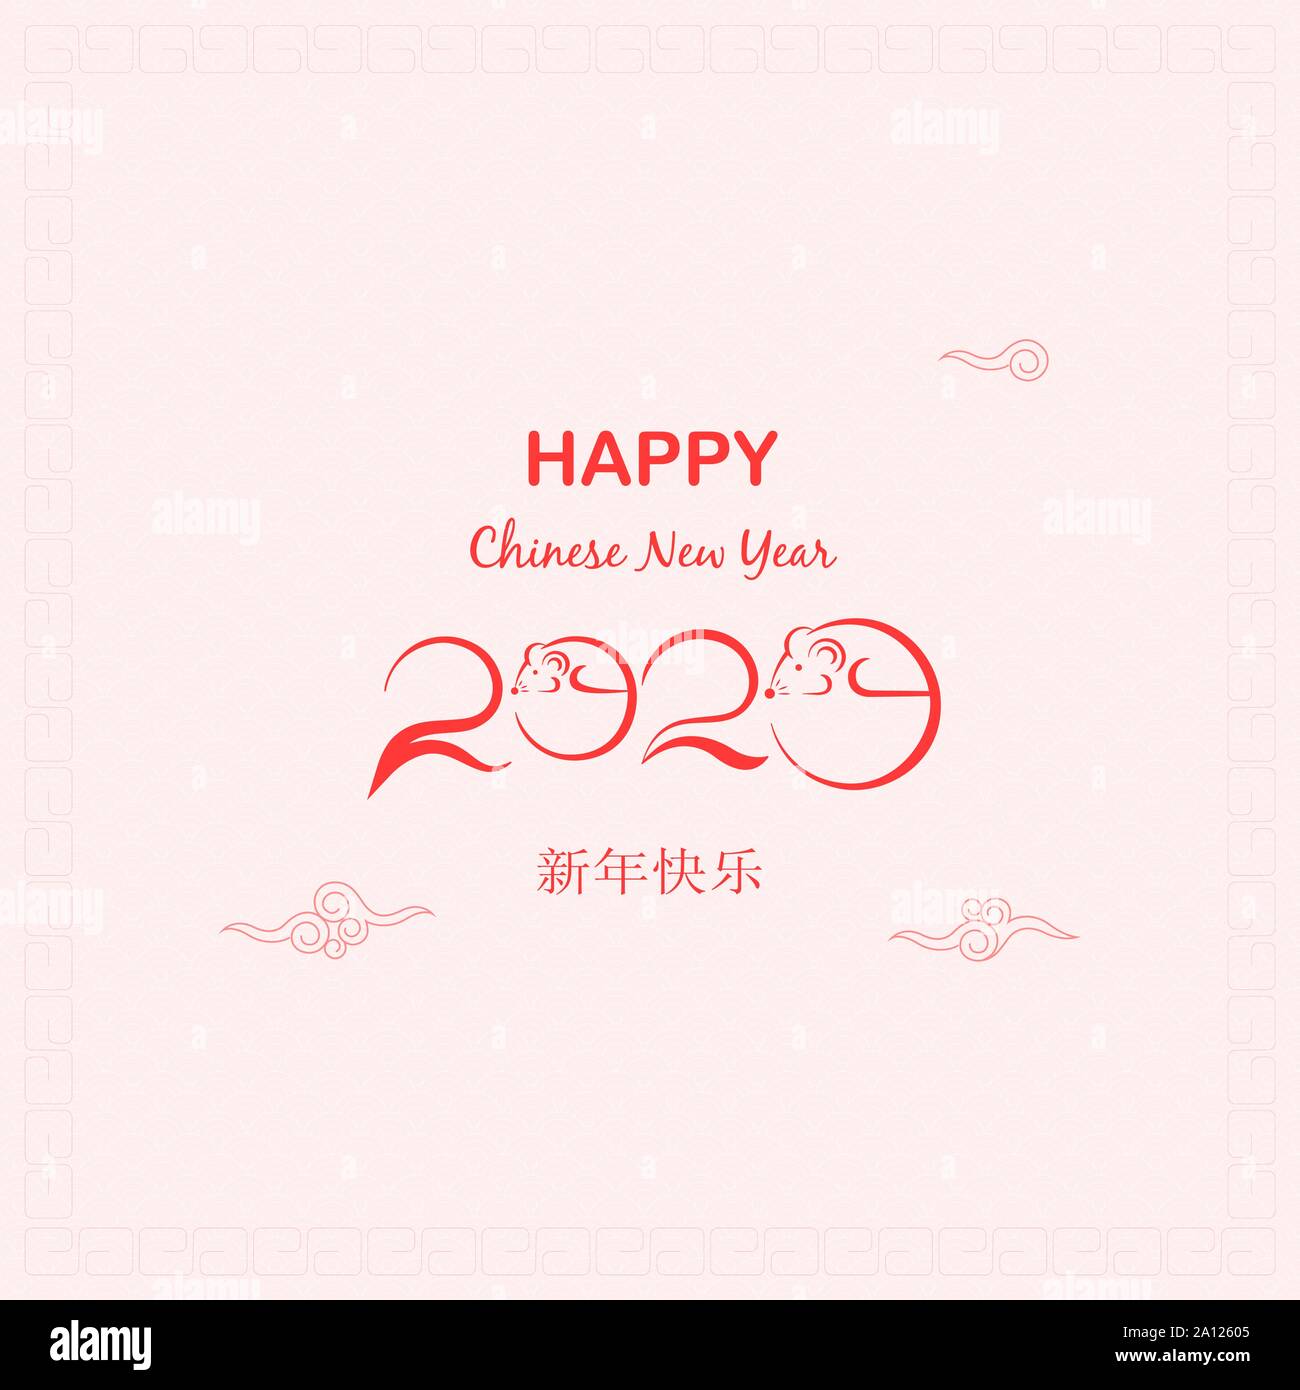 Chinese Zodiac greeting card design.Happy Chinese New Year 2020 background.Year of the ...